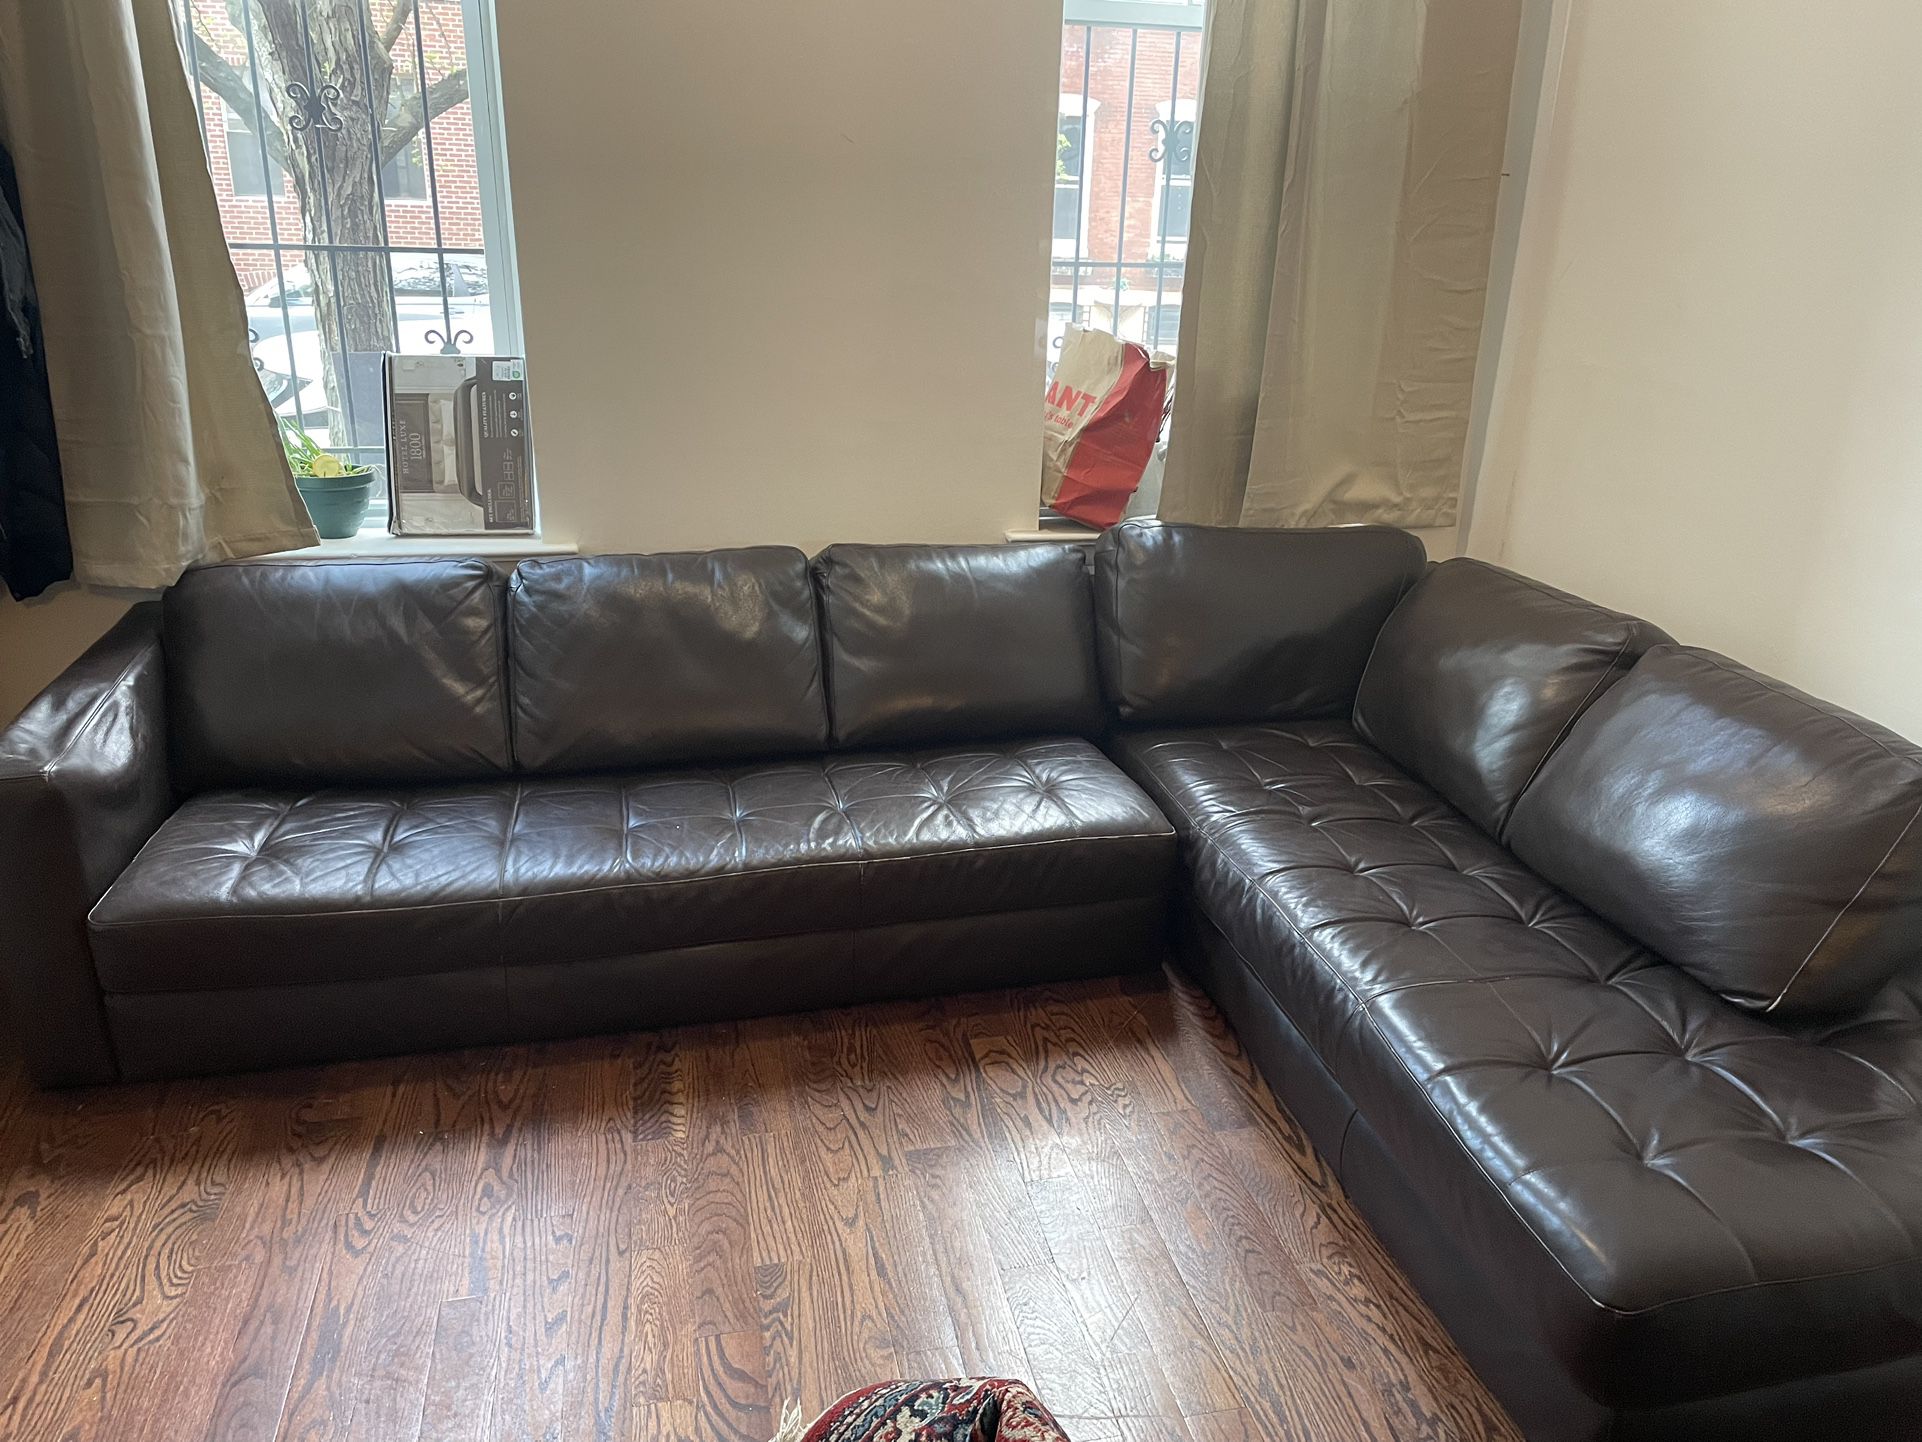 Large Sectional Brown Leather Couch